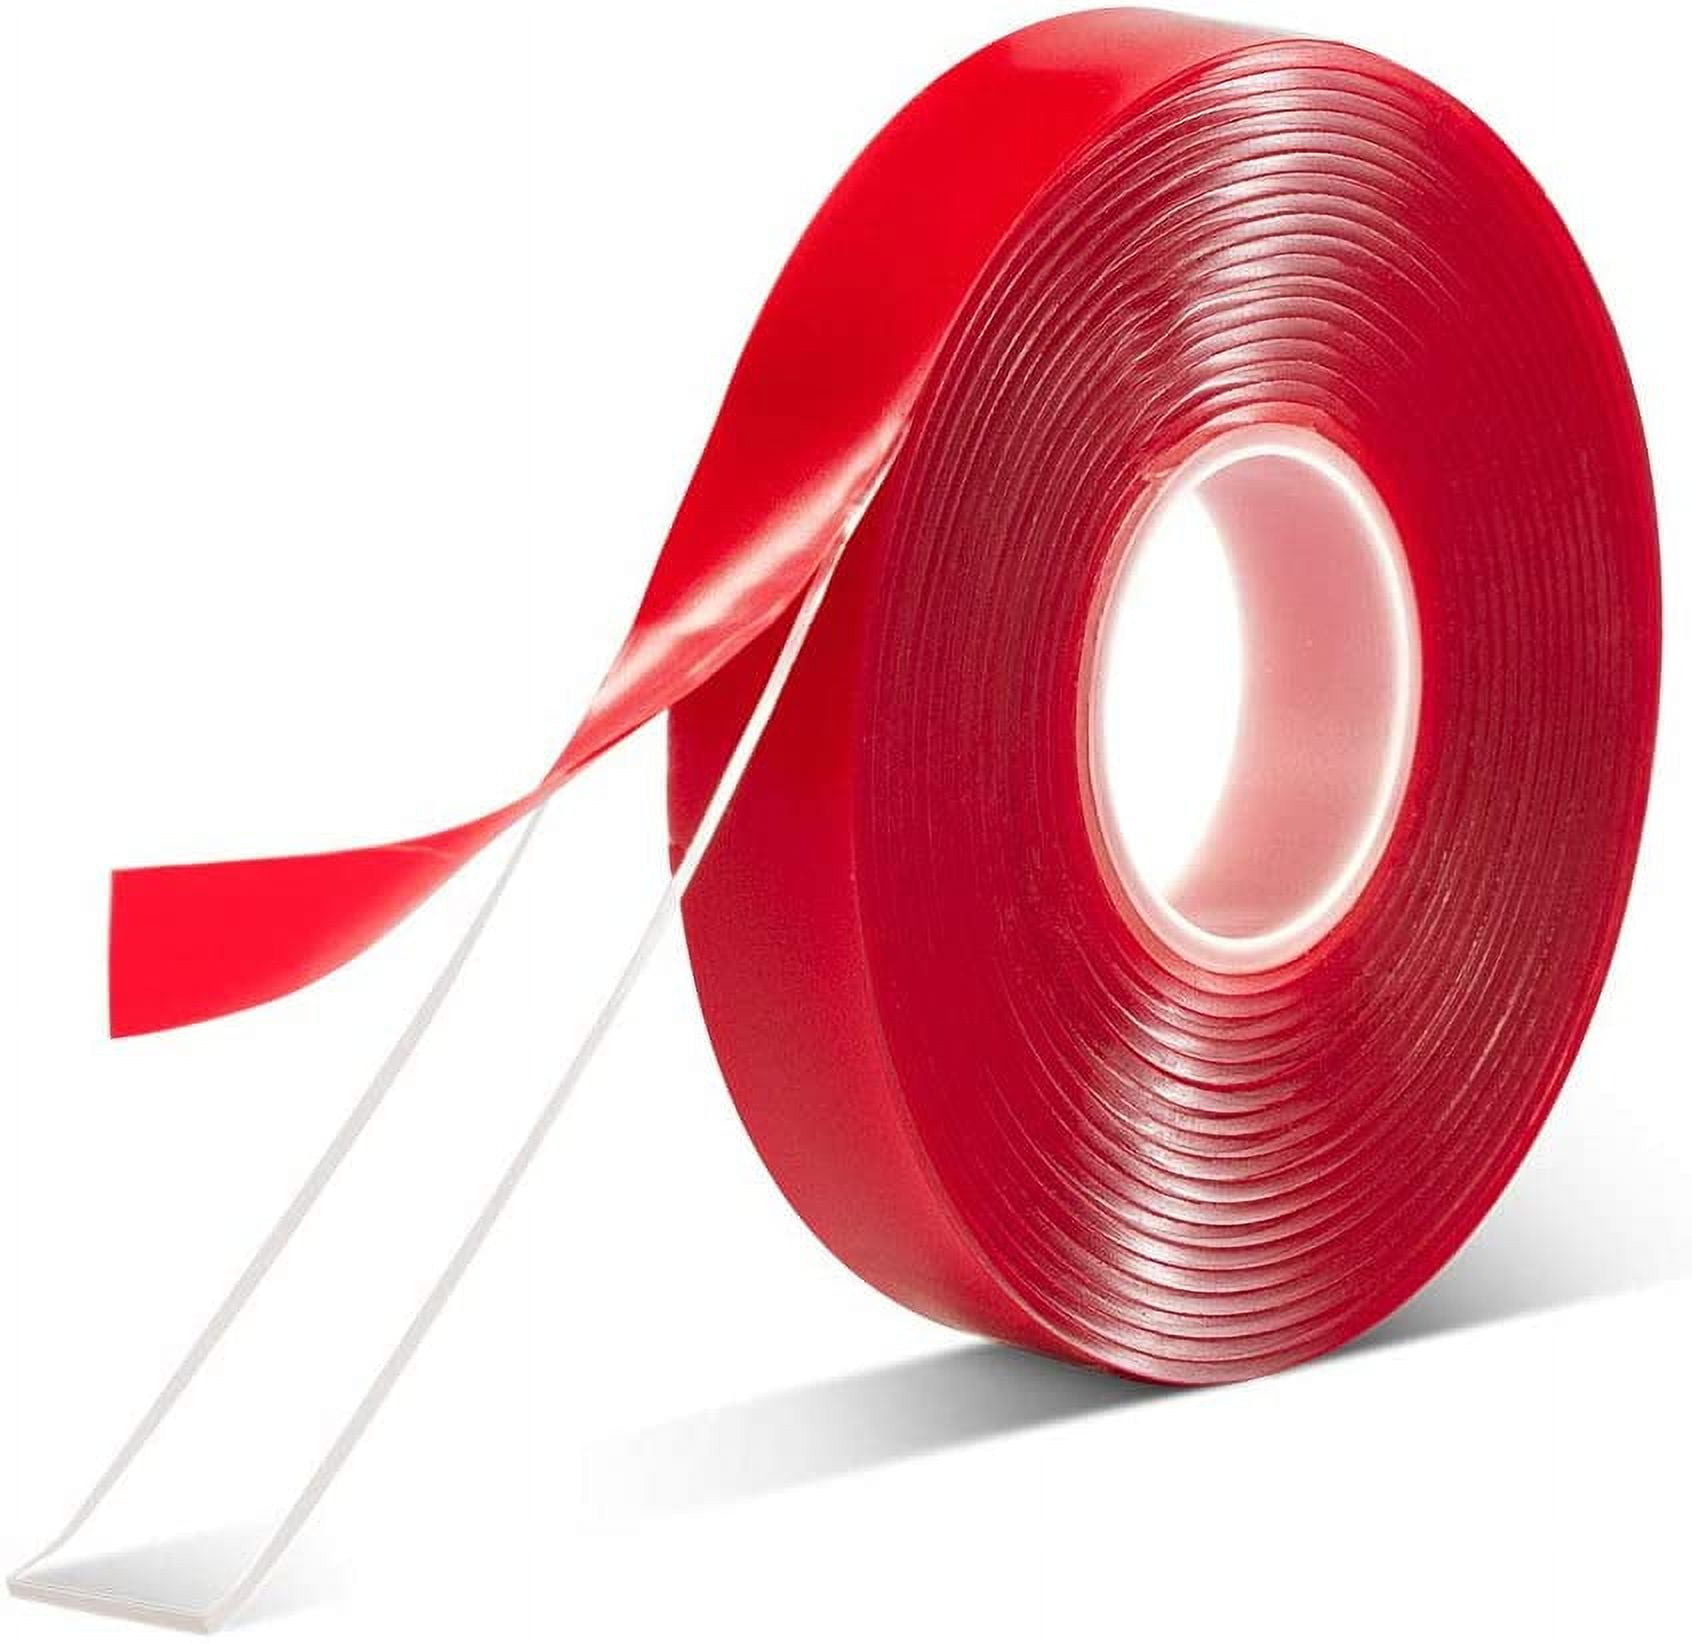 Dtydtpe Christmas Decorations, Strong Double Sided Tape Removable